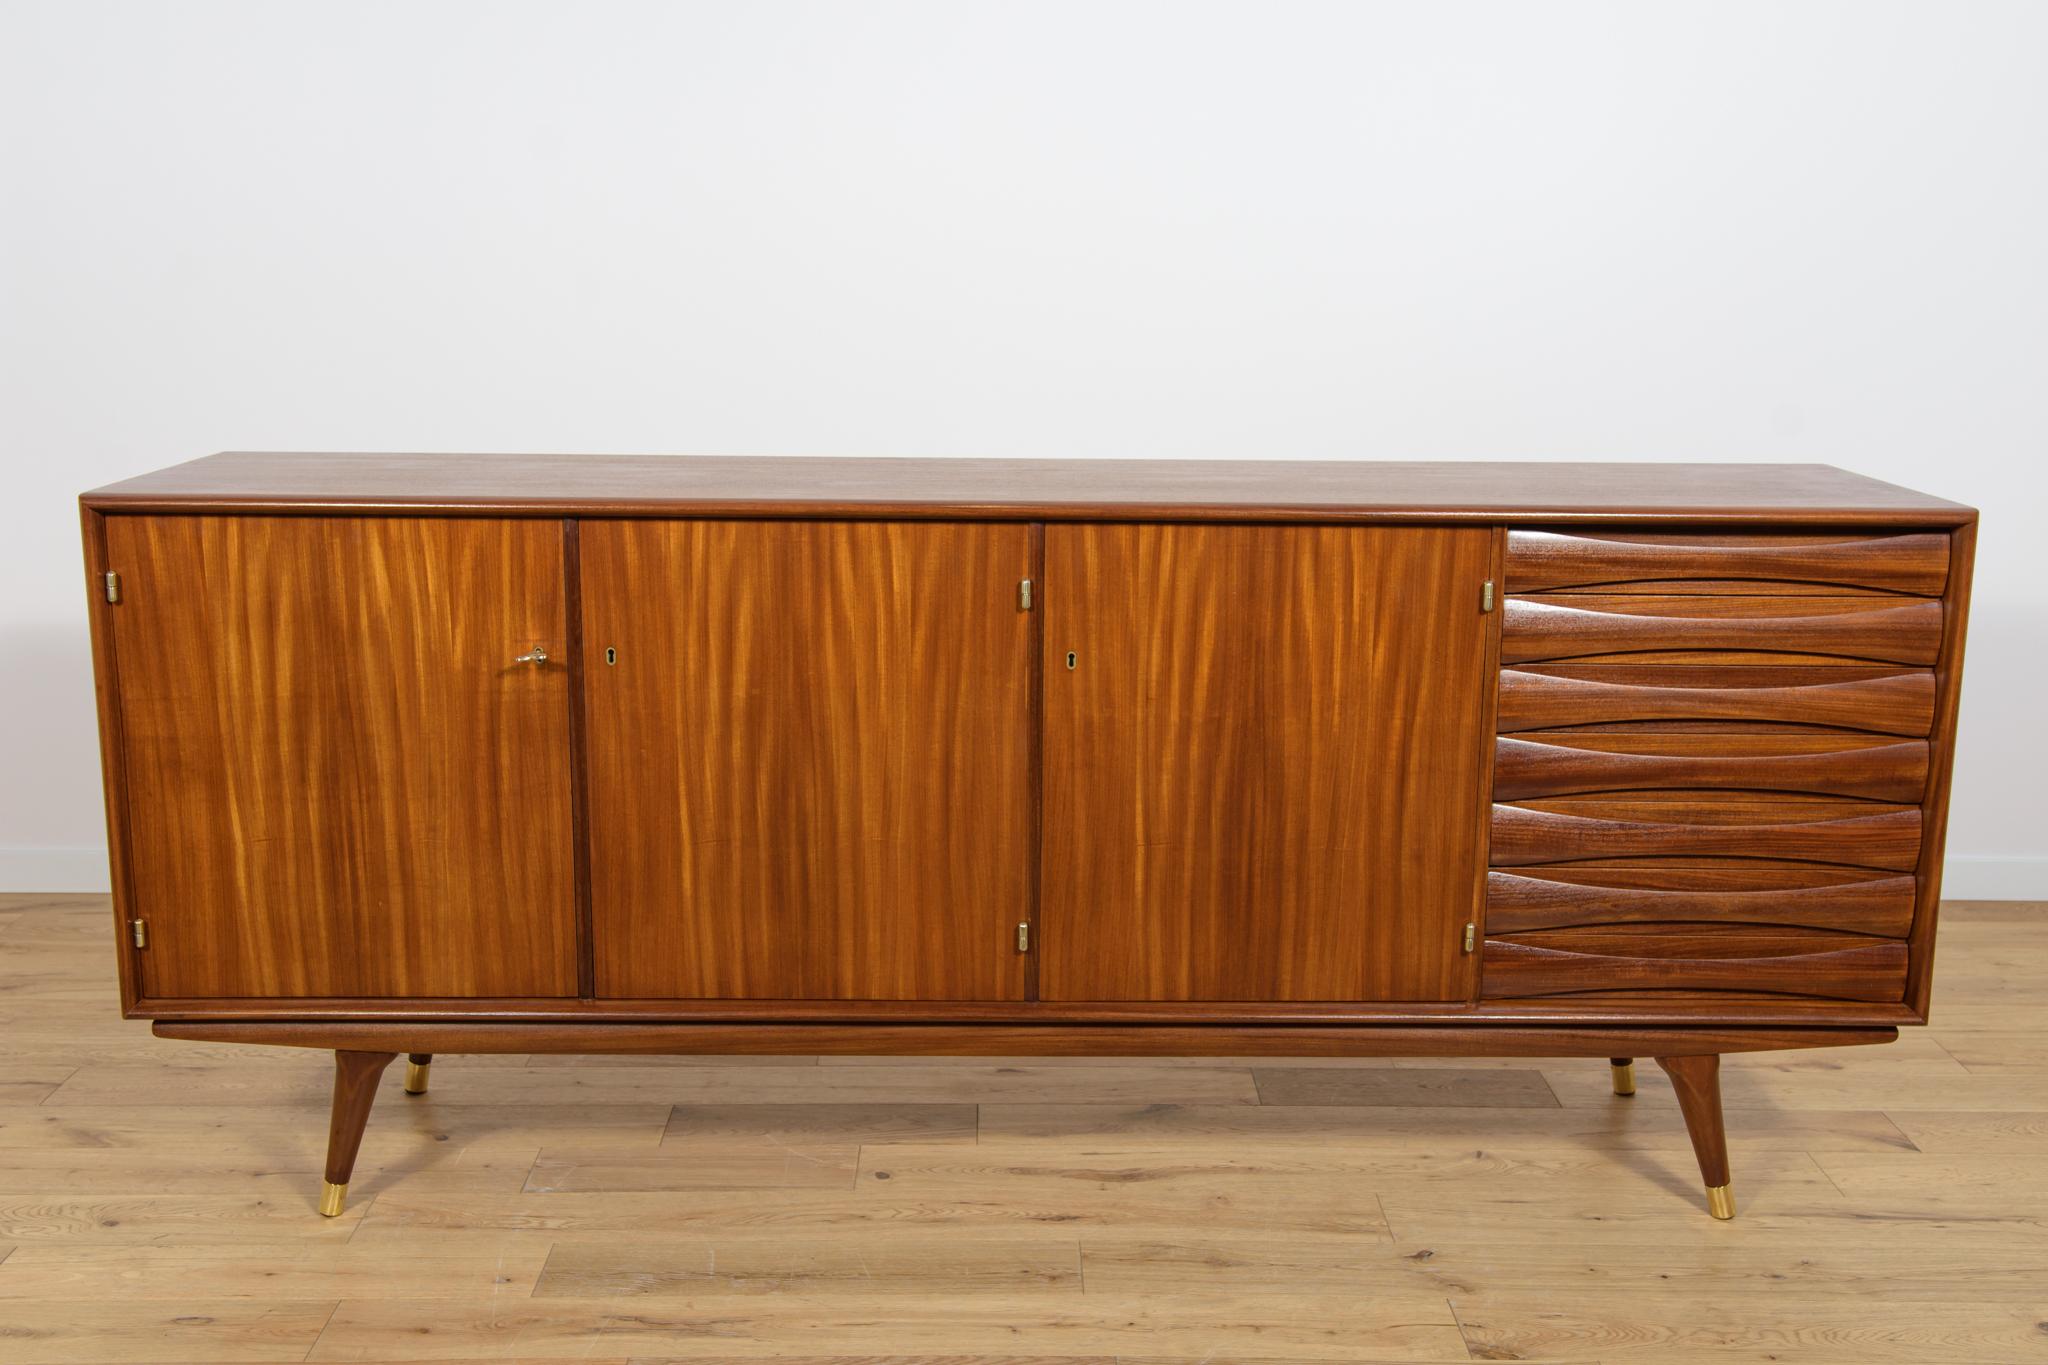 The teak sideboard was designed by Sven Andersen in the 1960s for Sven Andersen's Norwegian factory, Möbelfabrik Stavanger. The furniture has been professionally restored by removing old coatings, stained with oak stain and finished with